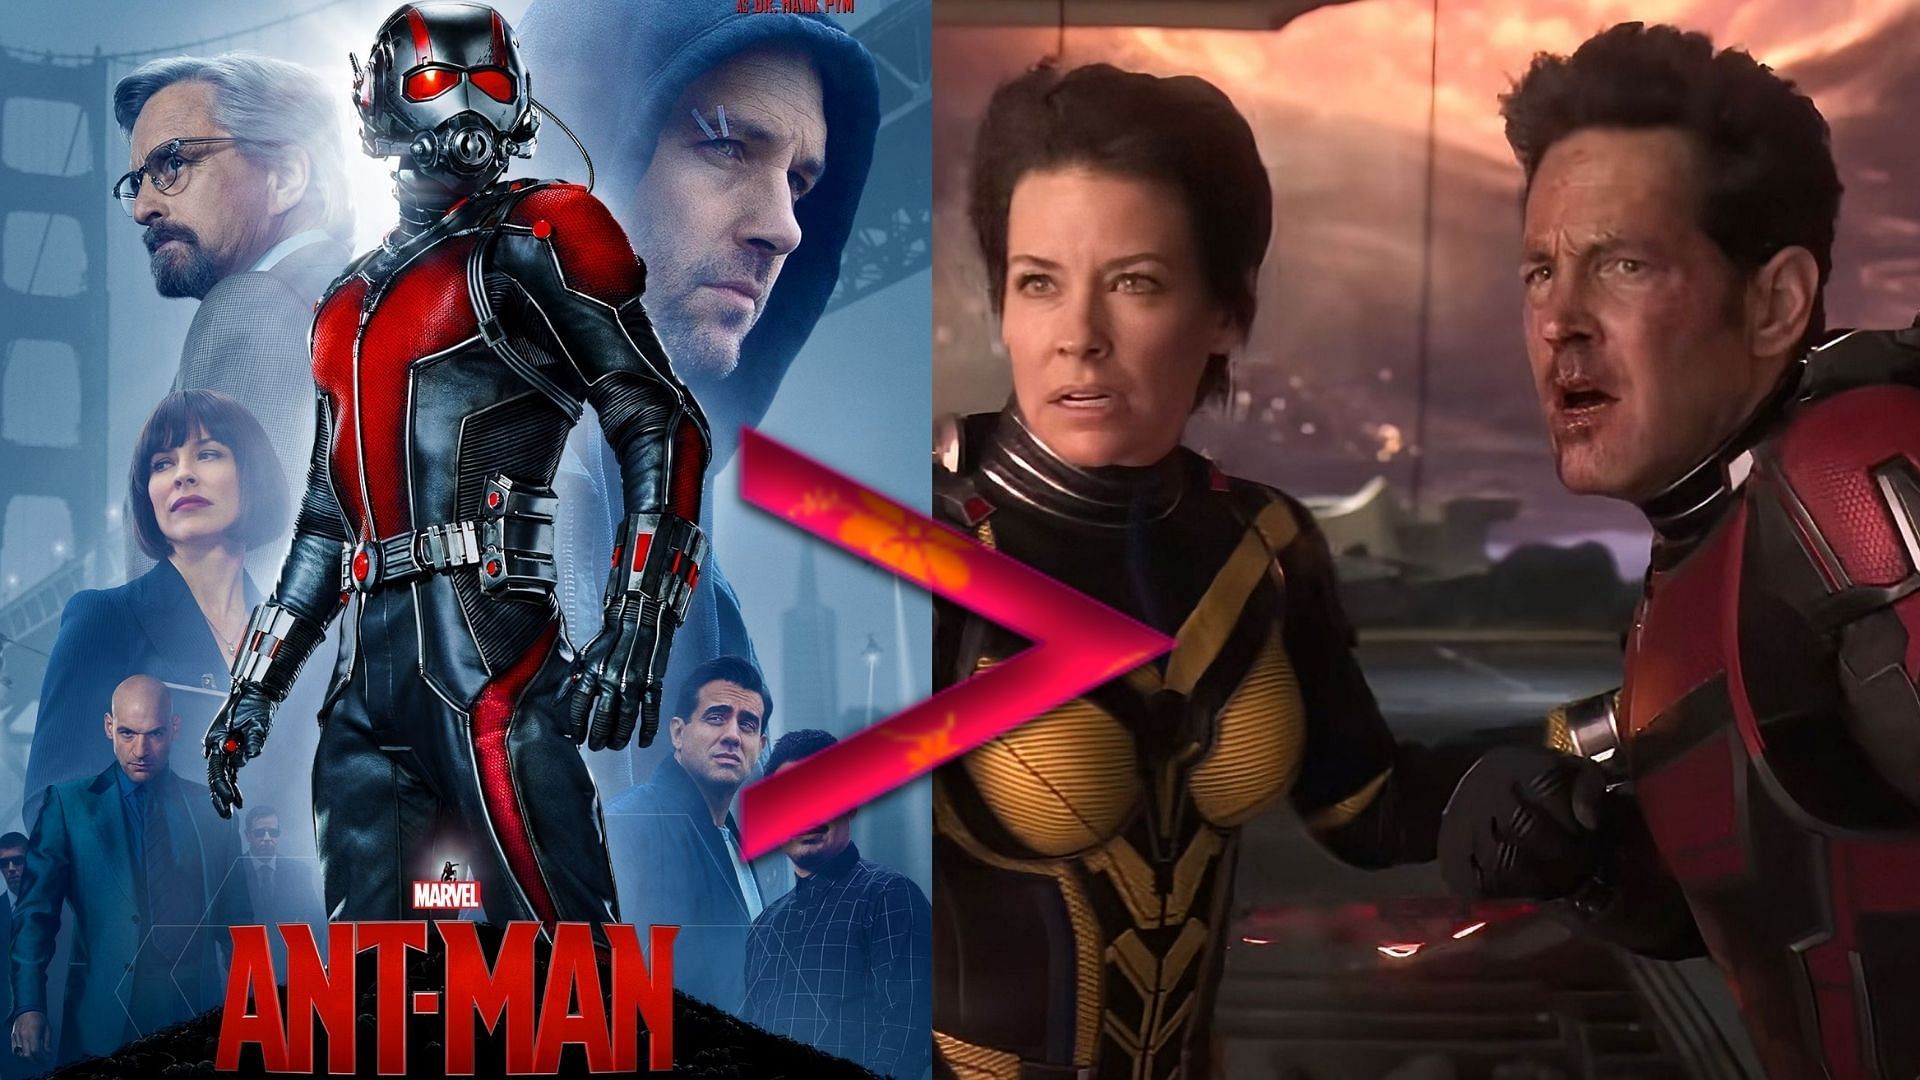 Box Office CLASH: Ant-Man 3 Leaves Shehzada Behind In Advance Bookings